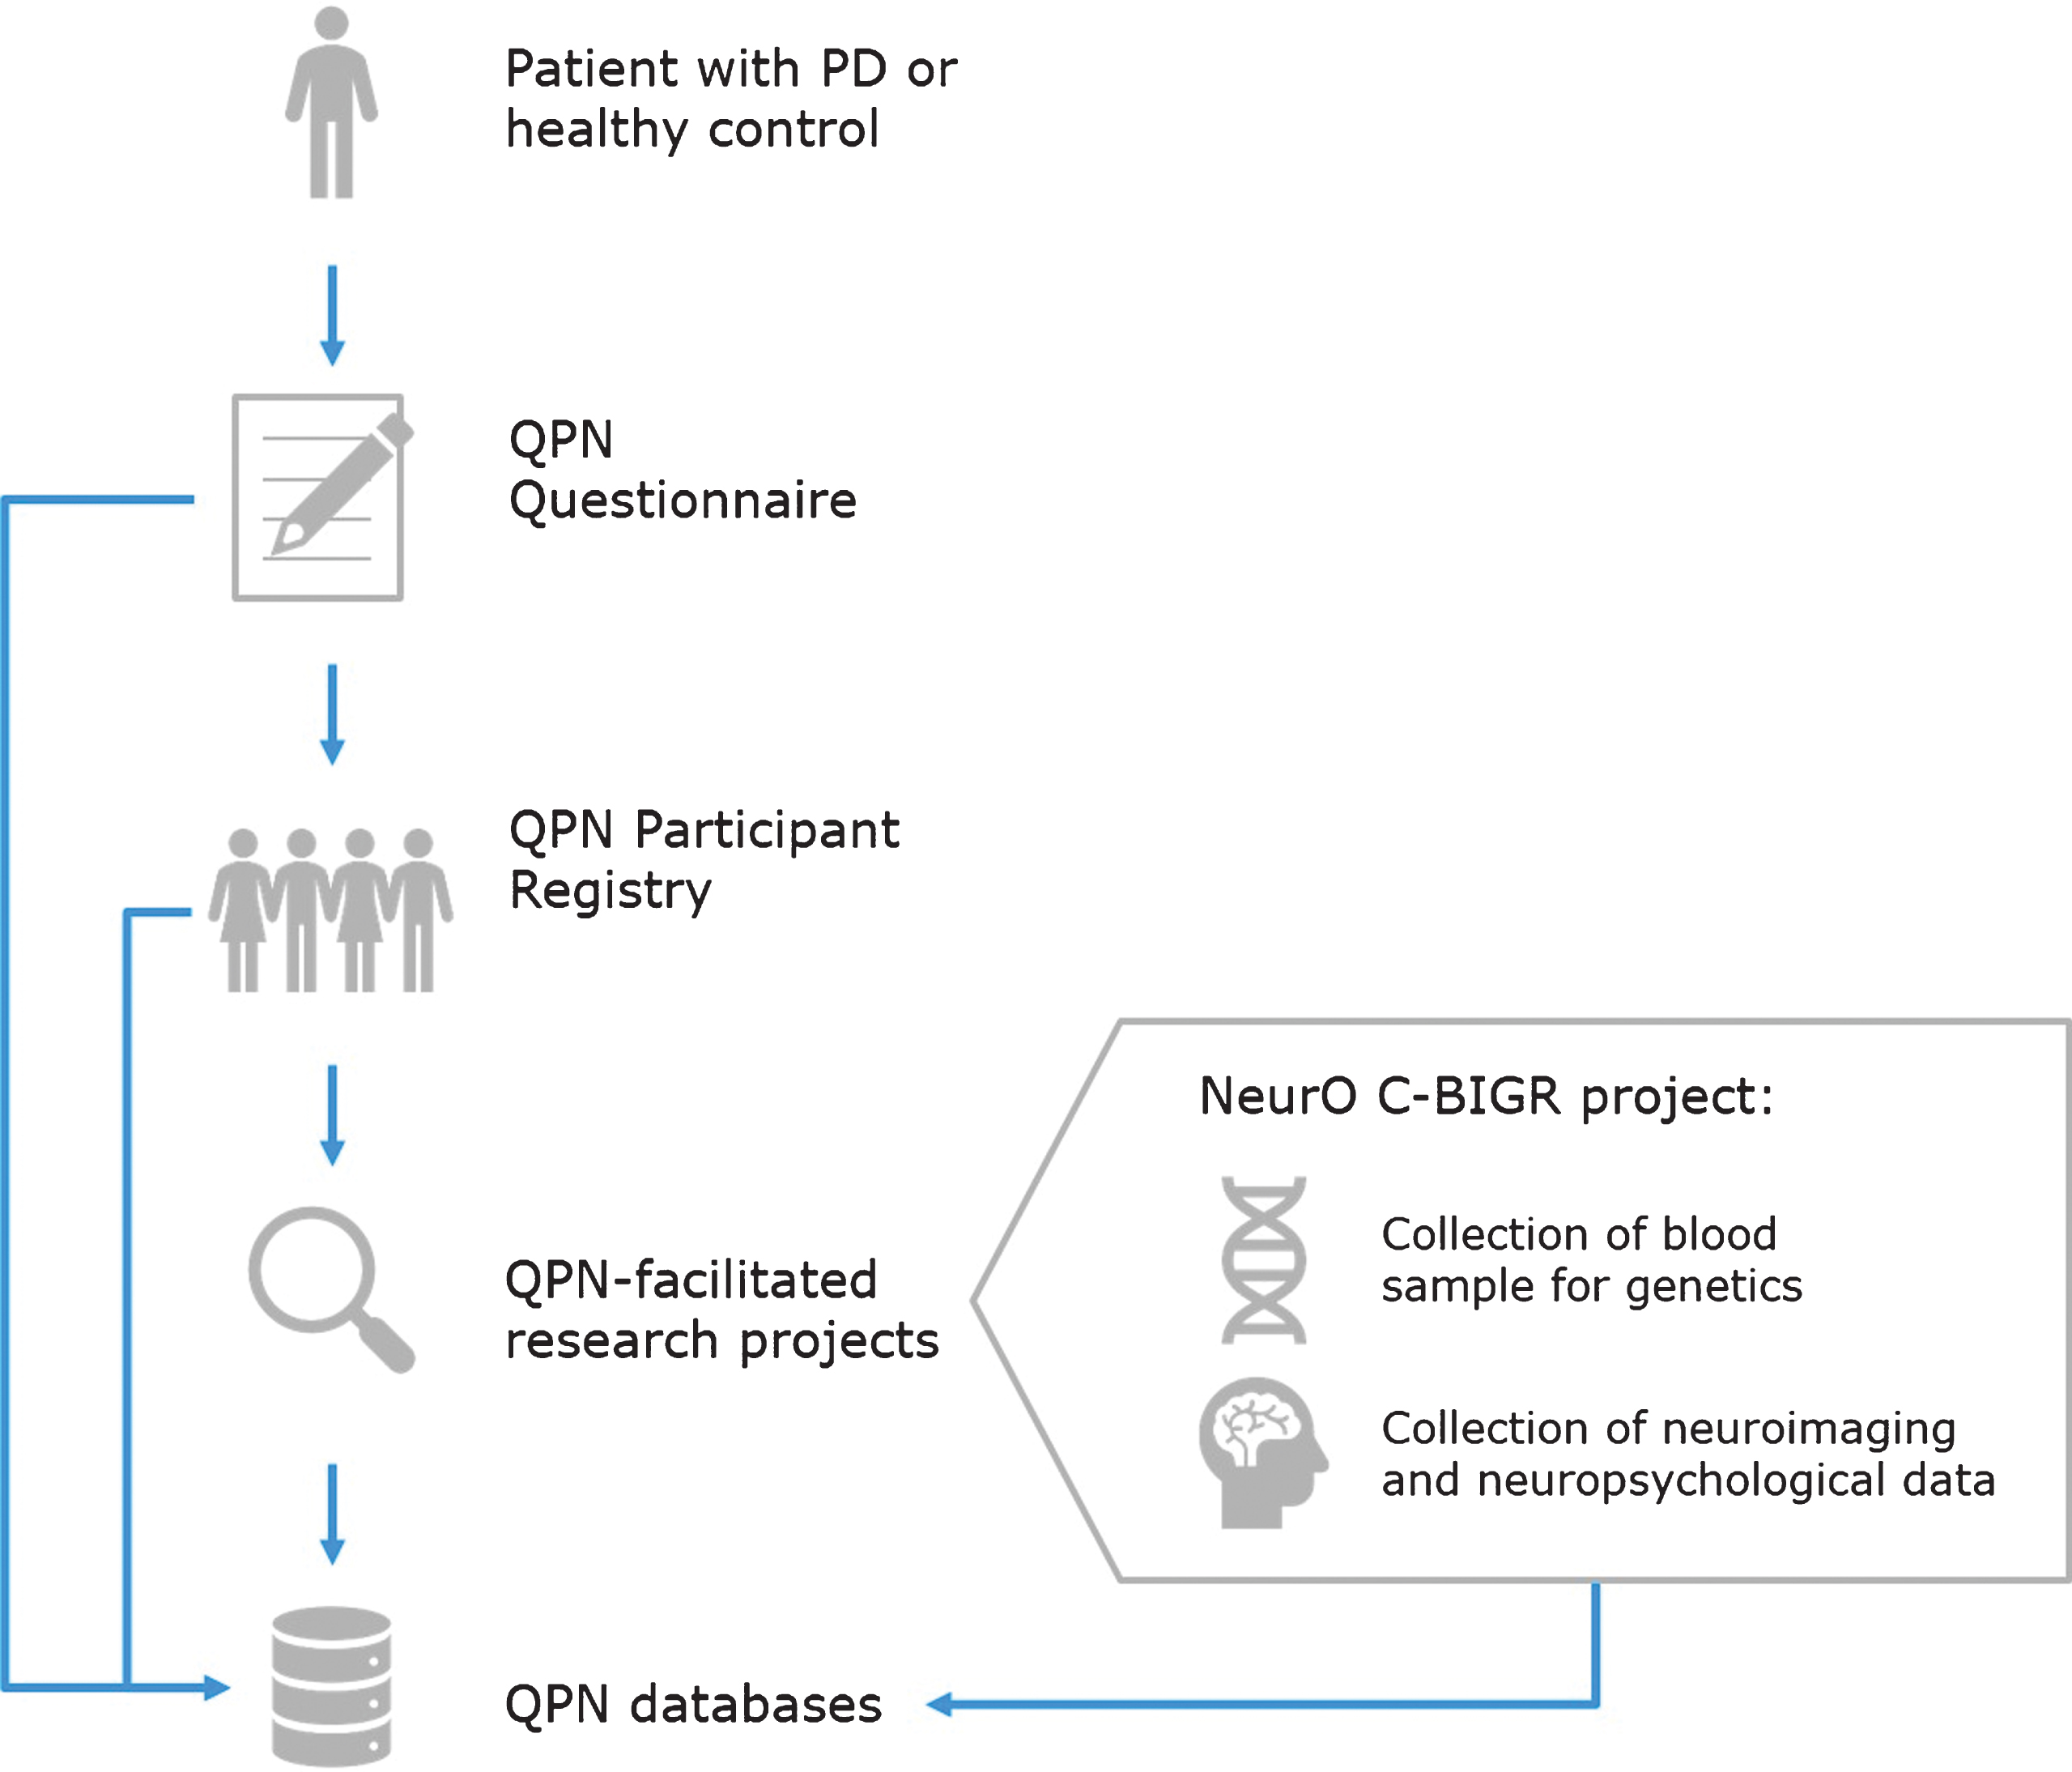 Quebec Parkinson Network (QPN) workflow for collection of patient data. Patients with PD or healthy controls who are recruited to the QPN Participant Registry must complete the QPN Questionnaire. Active members of the QPN Participant Registry may be selected for participation in QPN-facilitated research projects, such as the NeurO C-BIGR project which involves collection of blood samples for genetics and iPSCs derivation, as well as neuroimaging and neuropsychological data. Patient data collected through the QPN Questionnaire, medical records of patients in the QPN Participant Registry, and obtained via QPN-facilitated research projects are entered into the QPN databases.